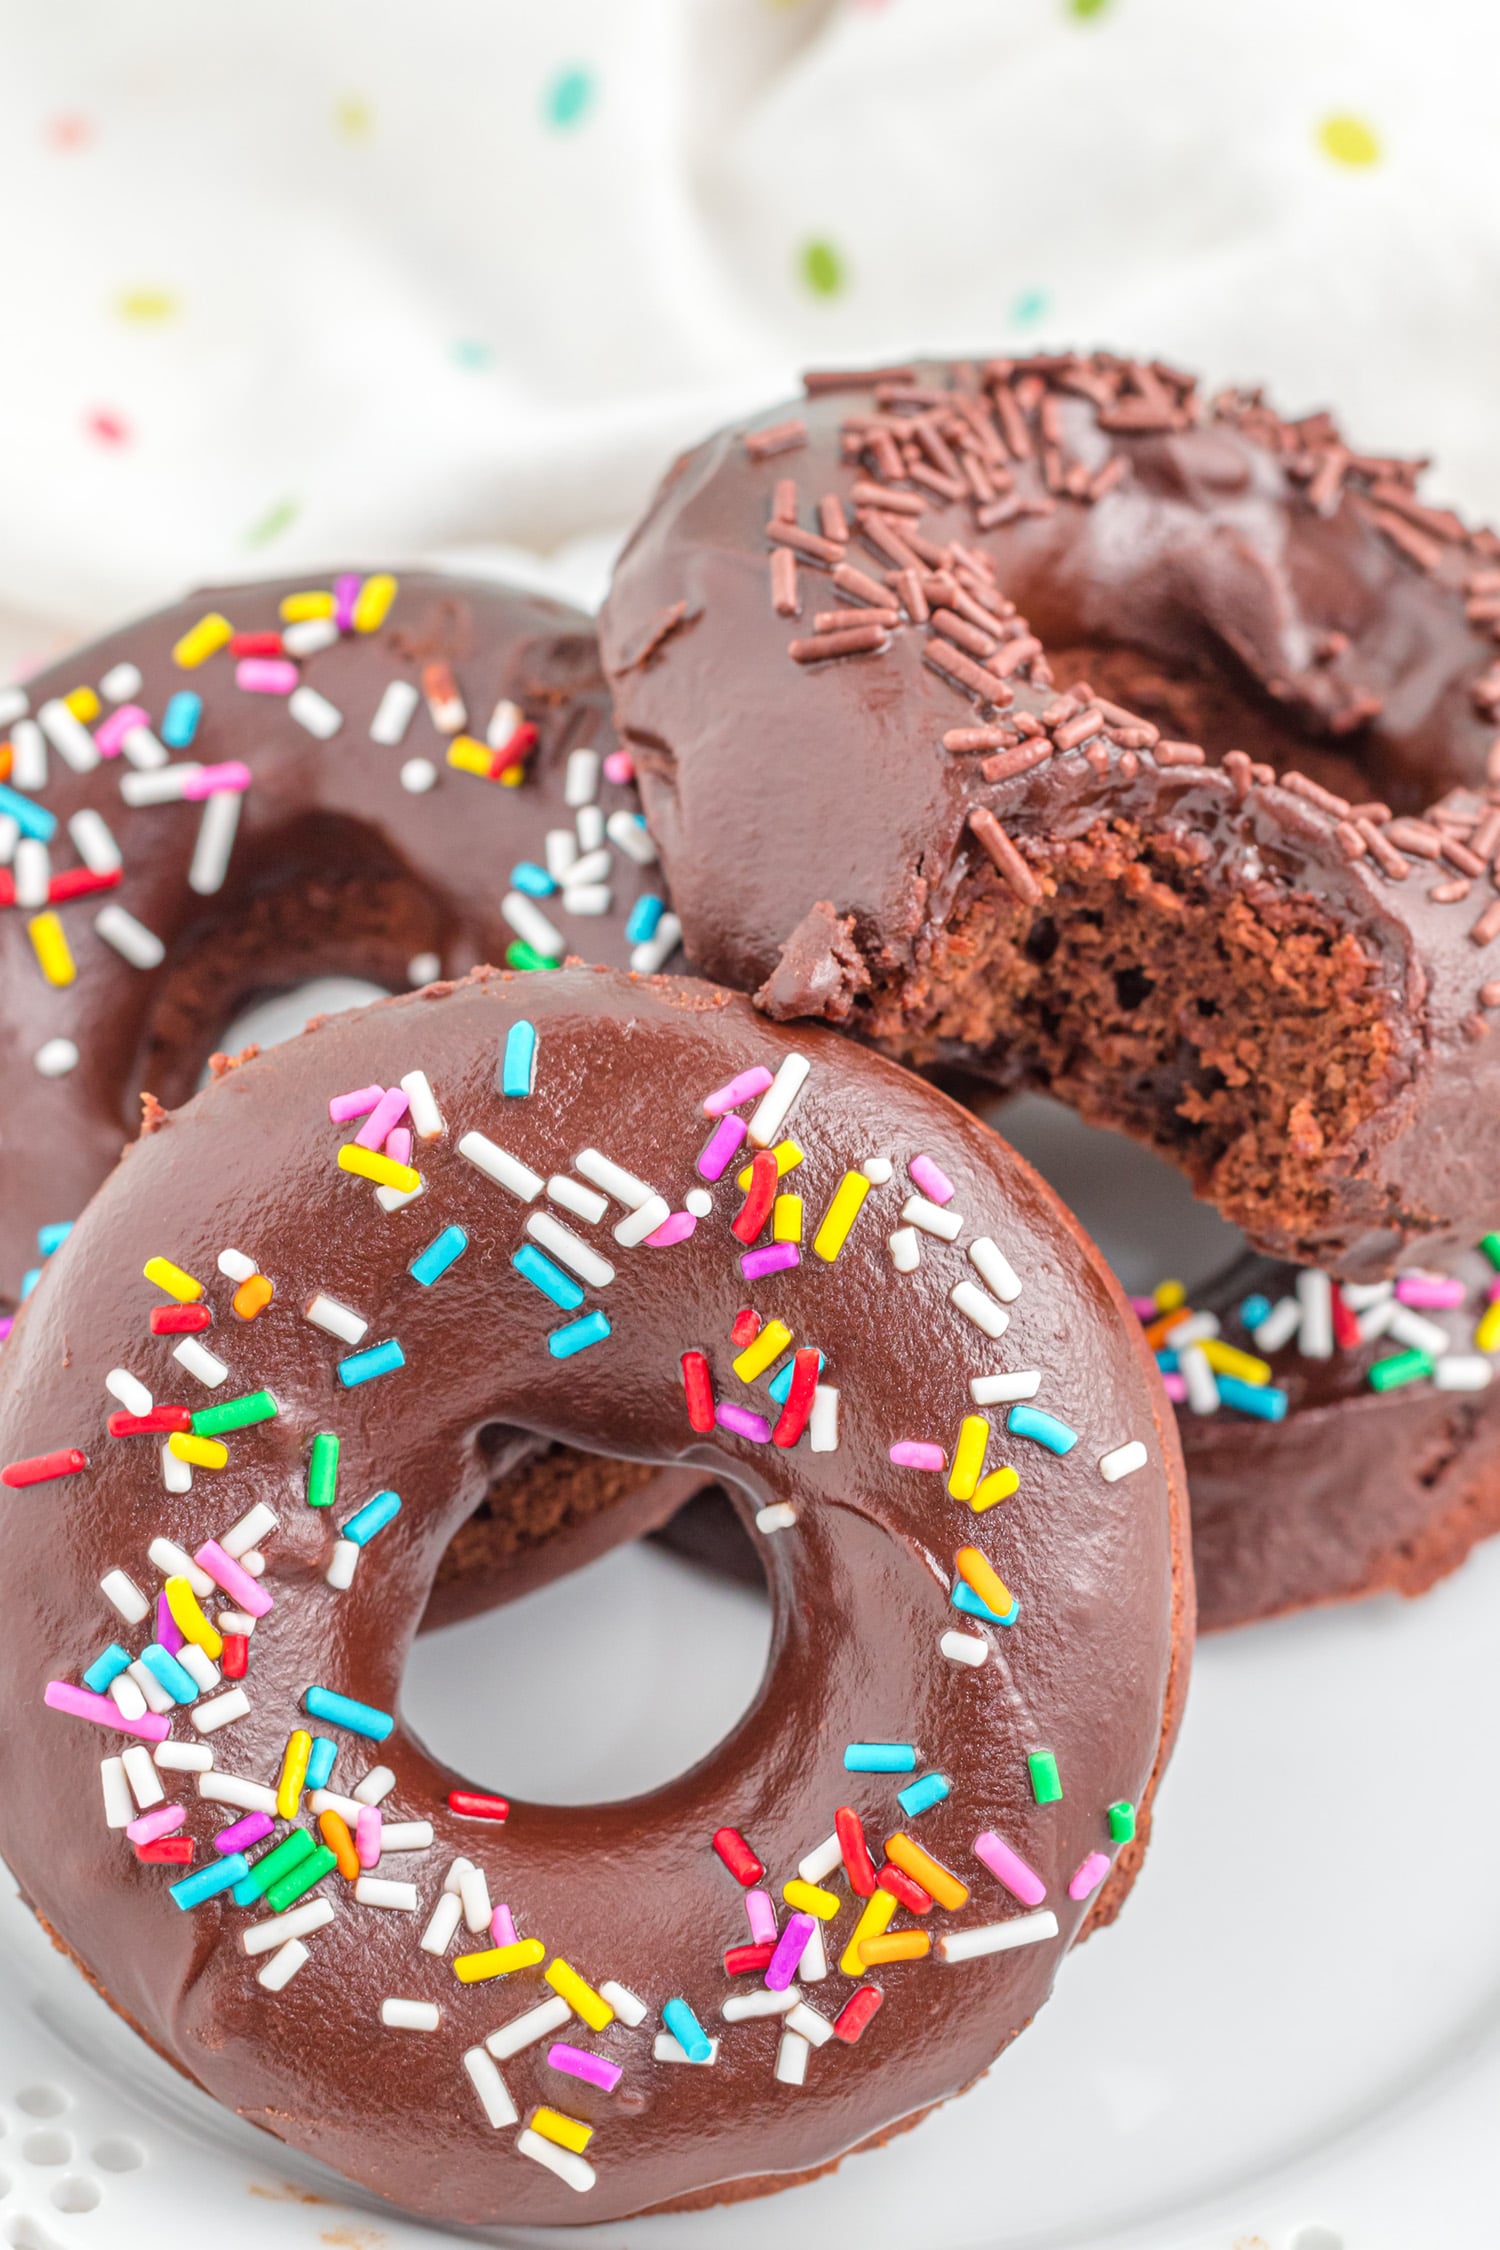 chocolate covered donut coloring pages